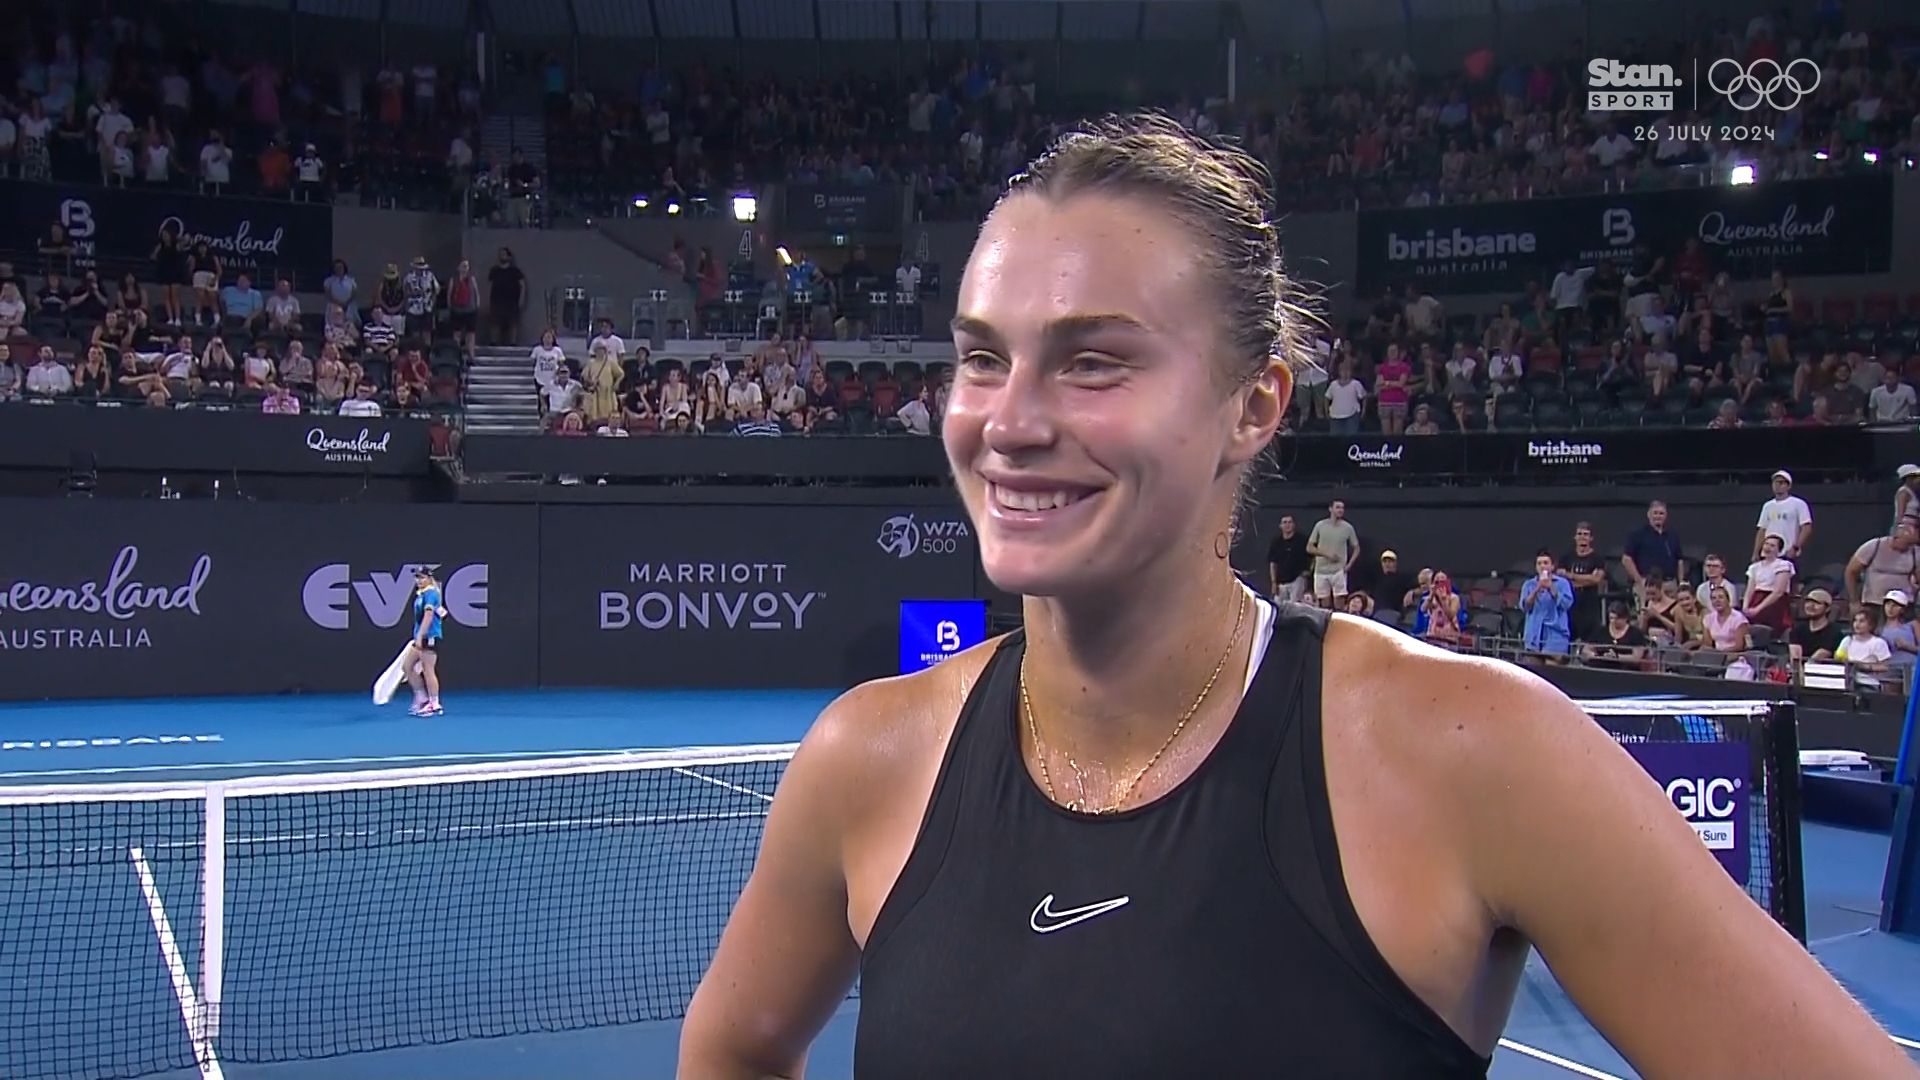 'I'm super happy to be back': Defending Australian Open champion Aryna Sabalenka charms crowd with classic interview